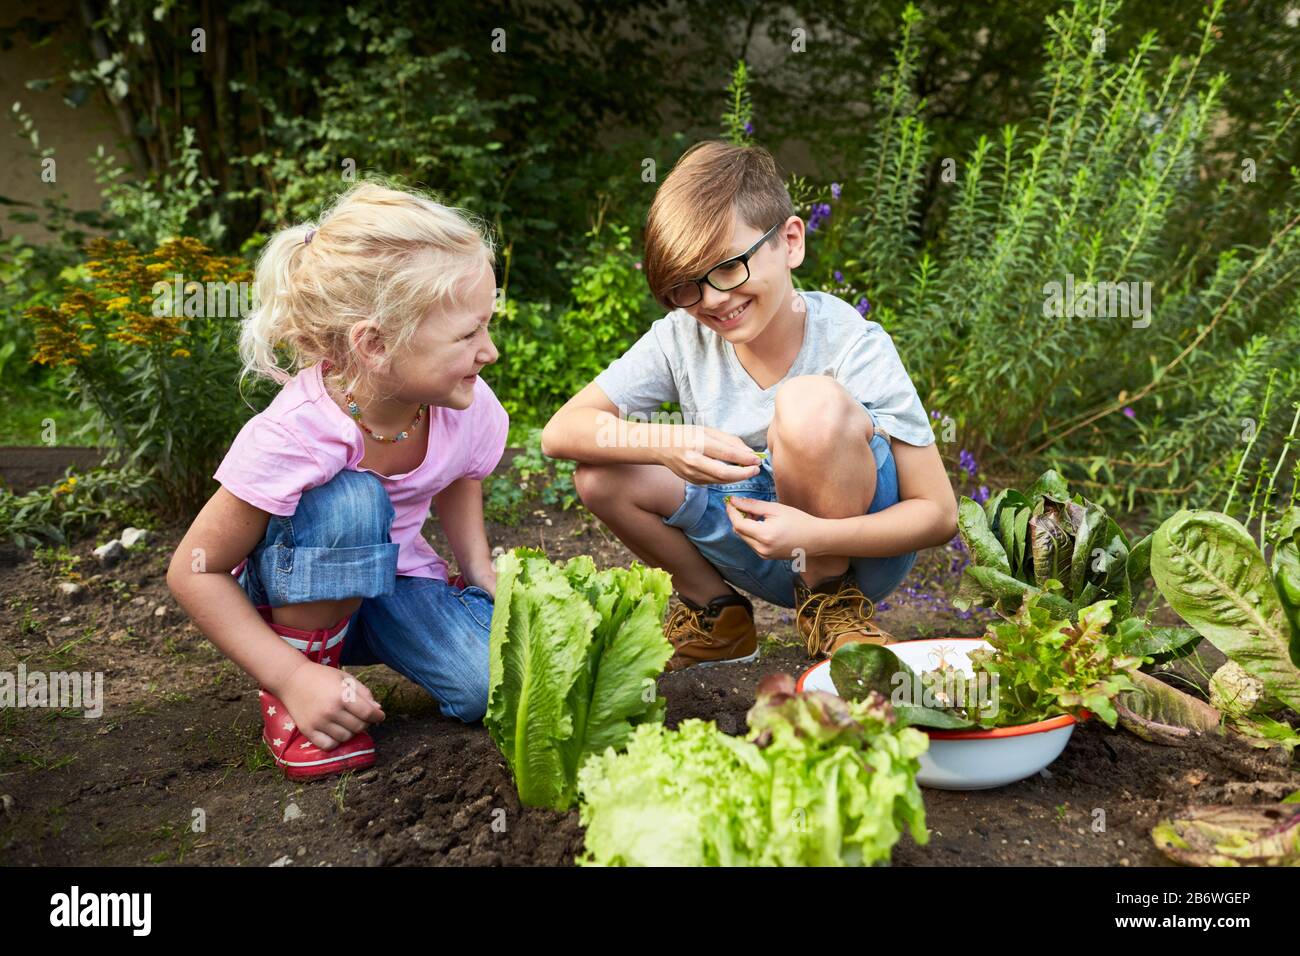 Children investigating food. Series: cooking salad soup, harvesting salad. Learning according to the Reggio Pedagogy principle, playful understanding and discovery. Germany Stock Photo